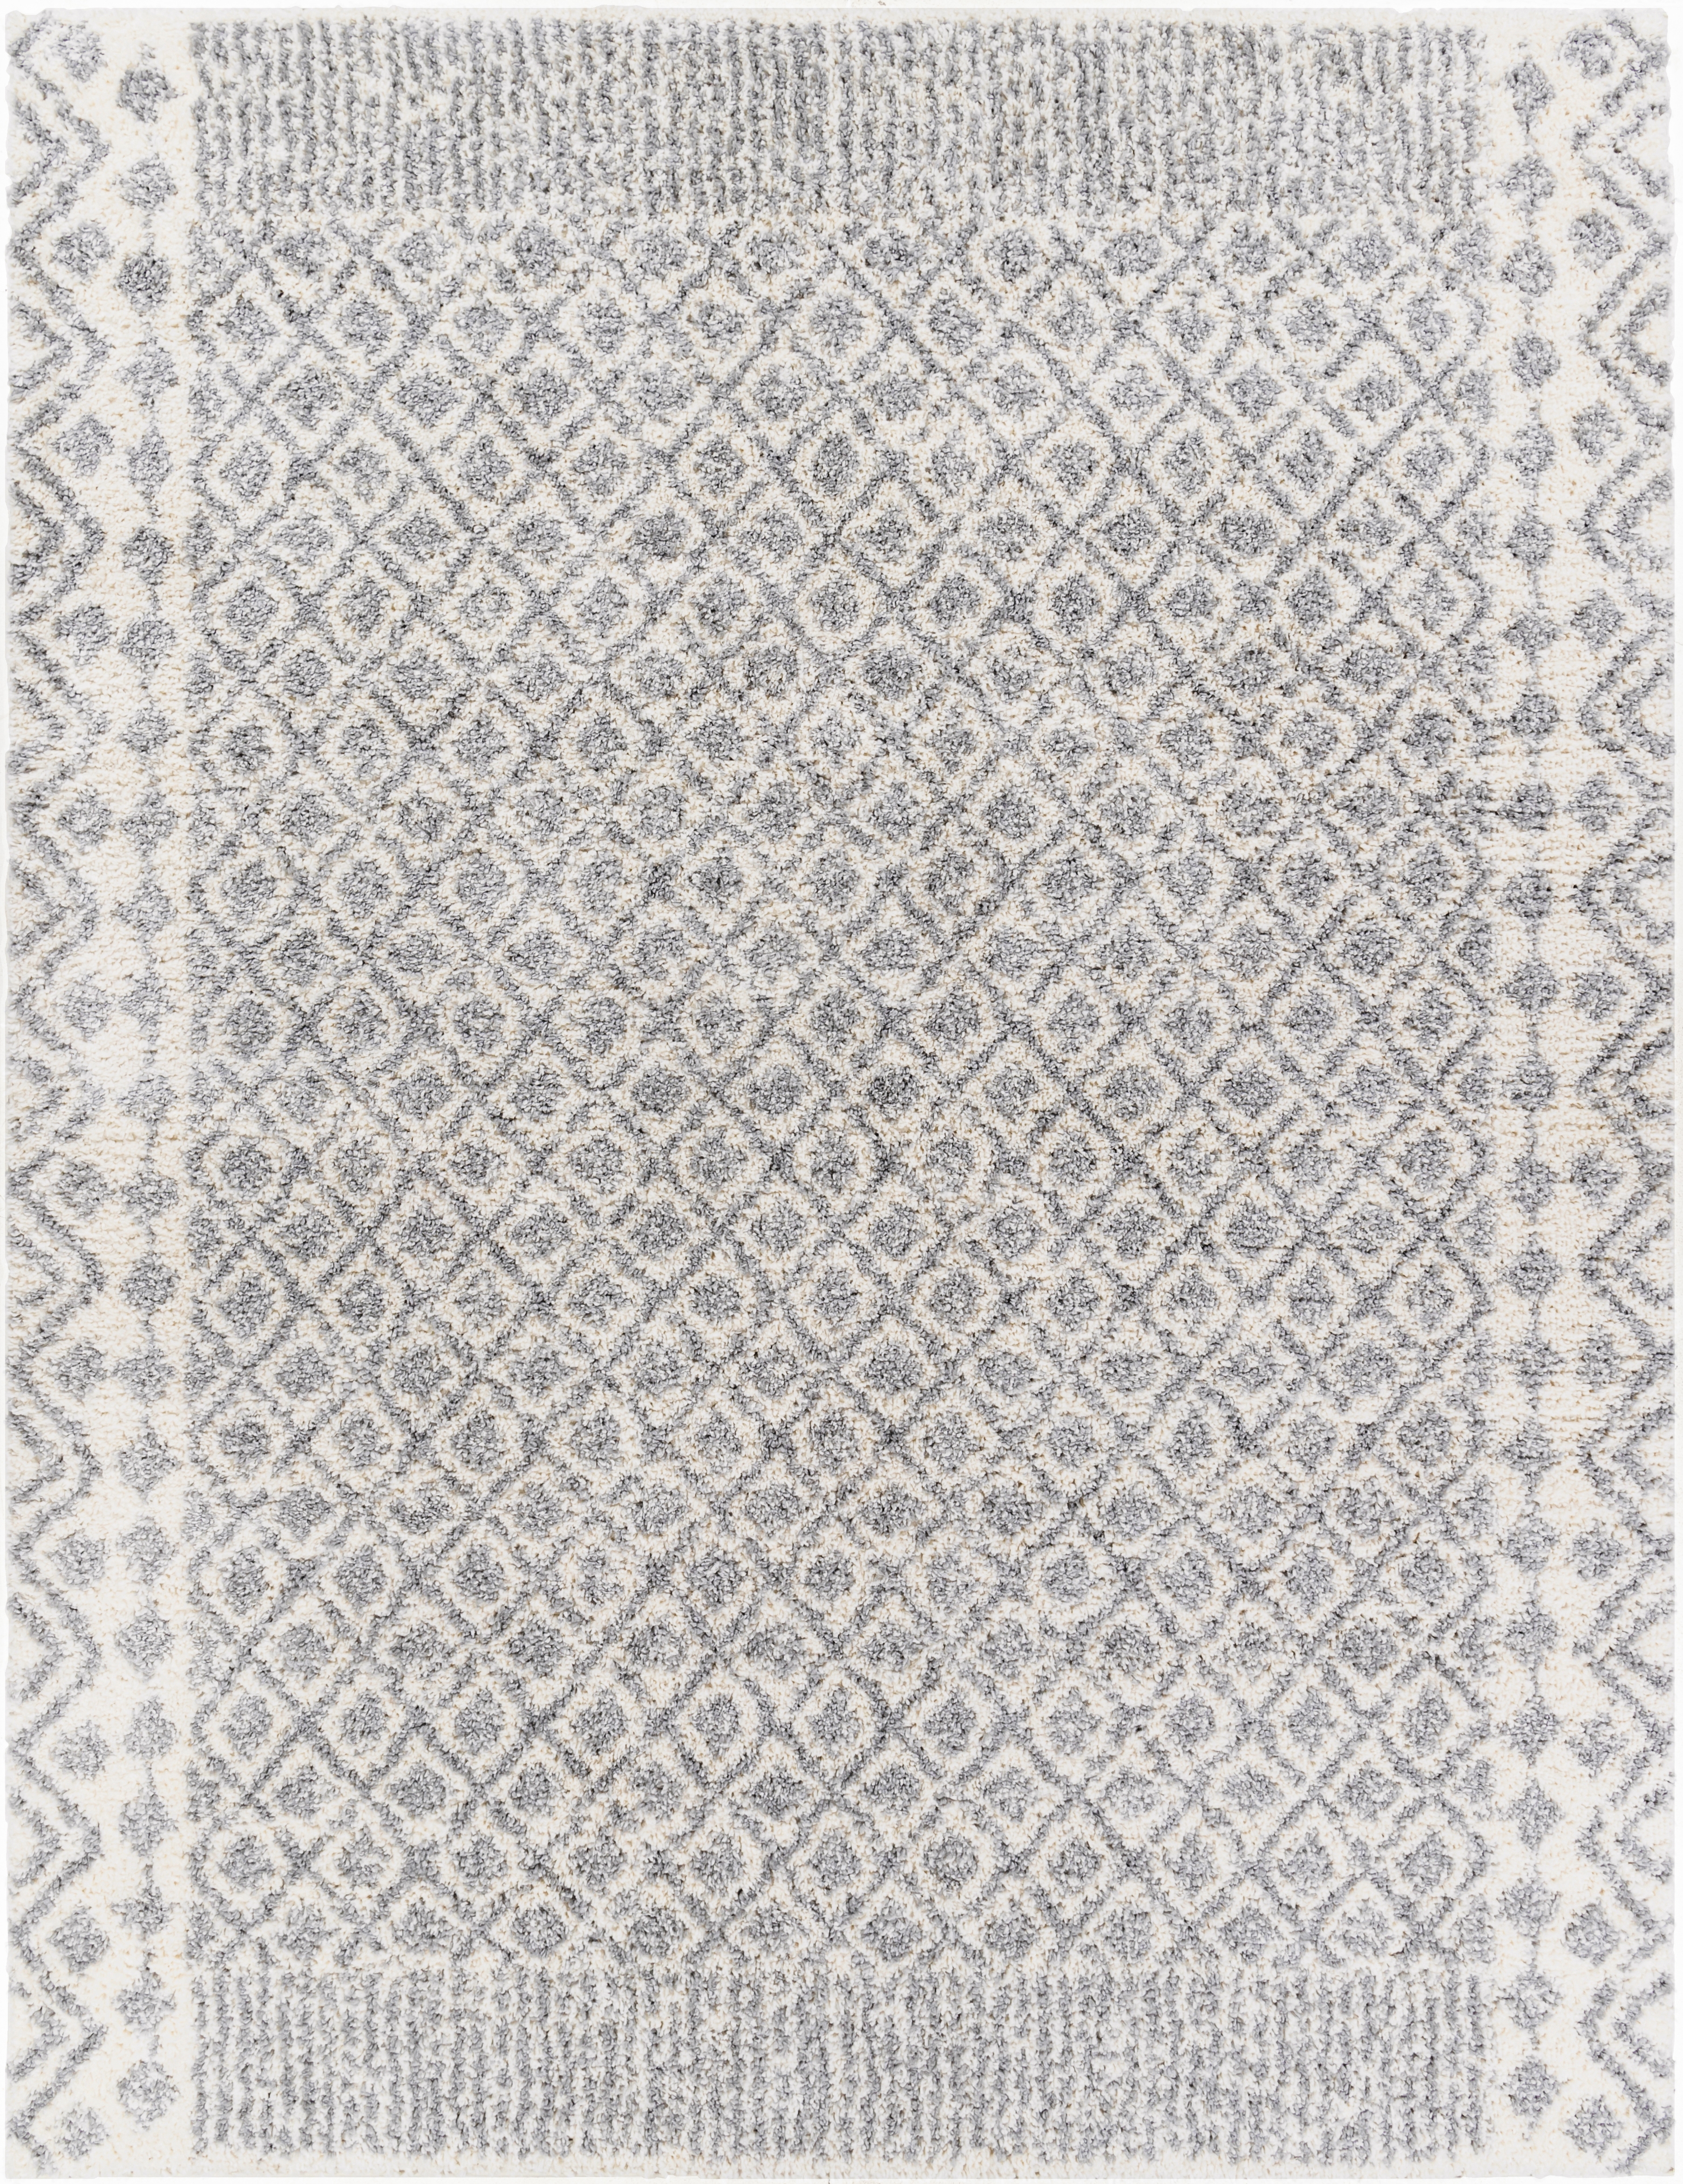 Deluxe Shag Rug, 7'10" x 10'3" - Image 0